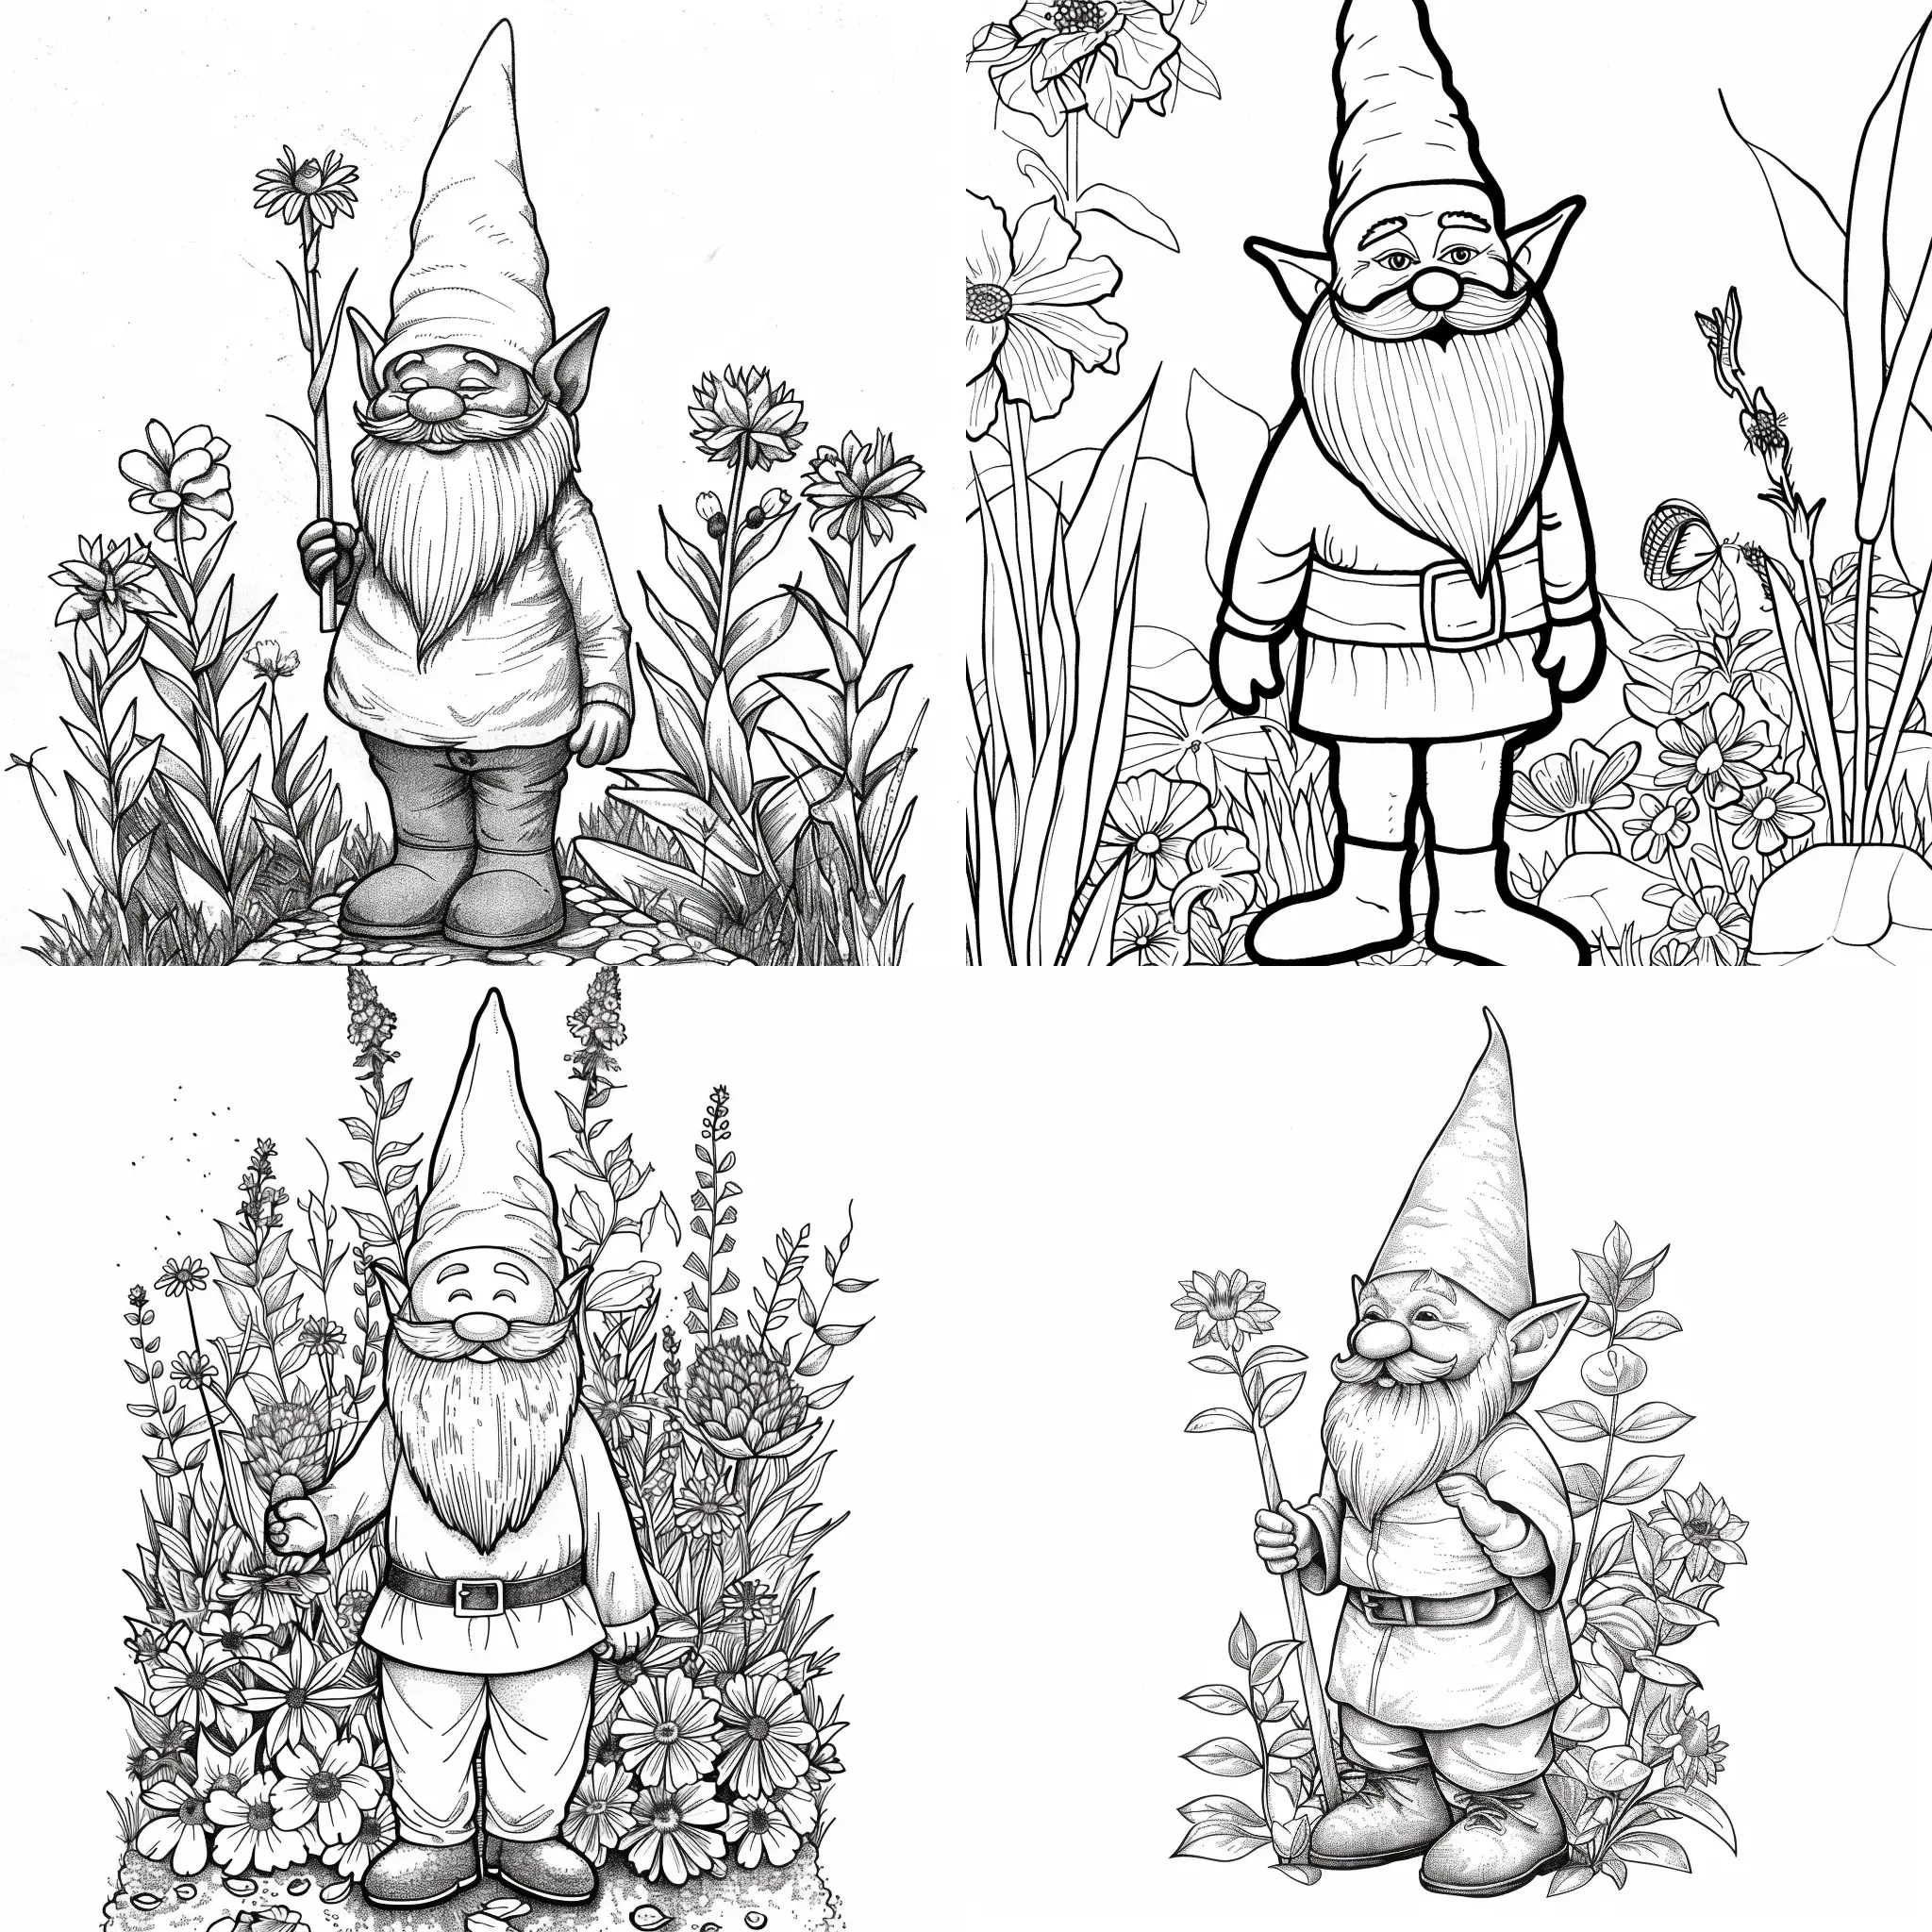 Garden Gnome for coloring book pages